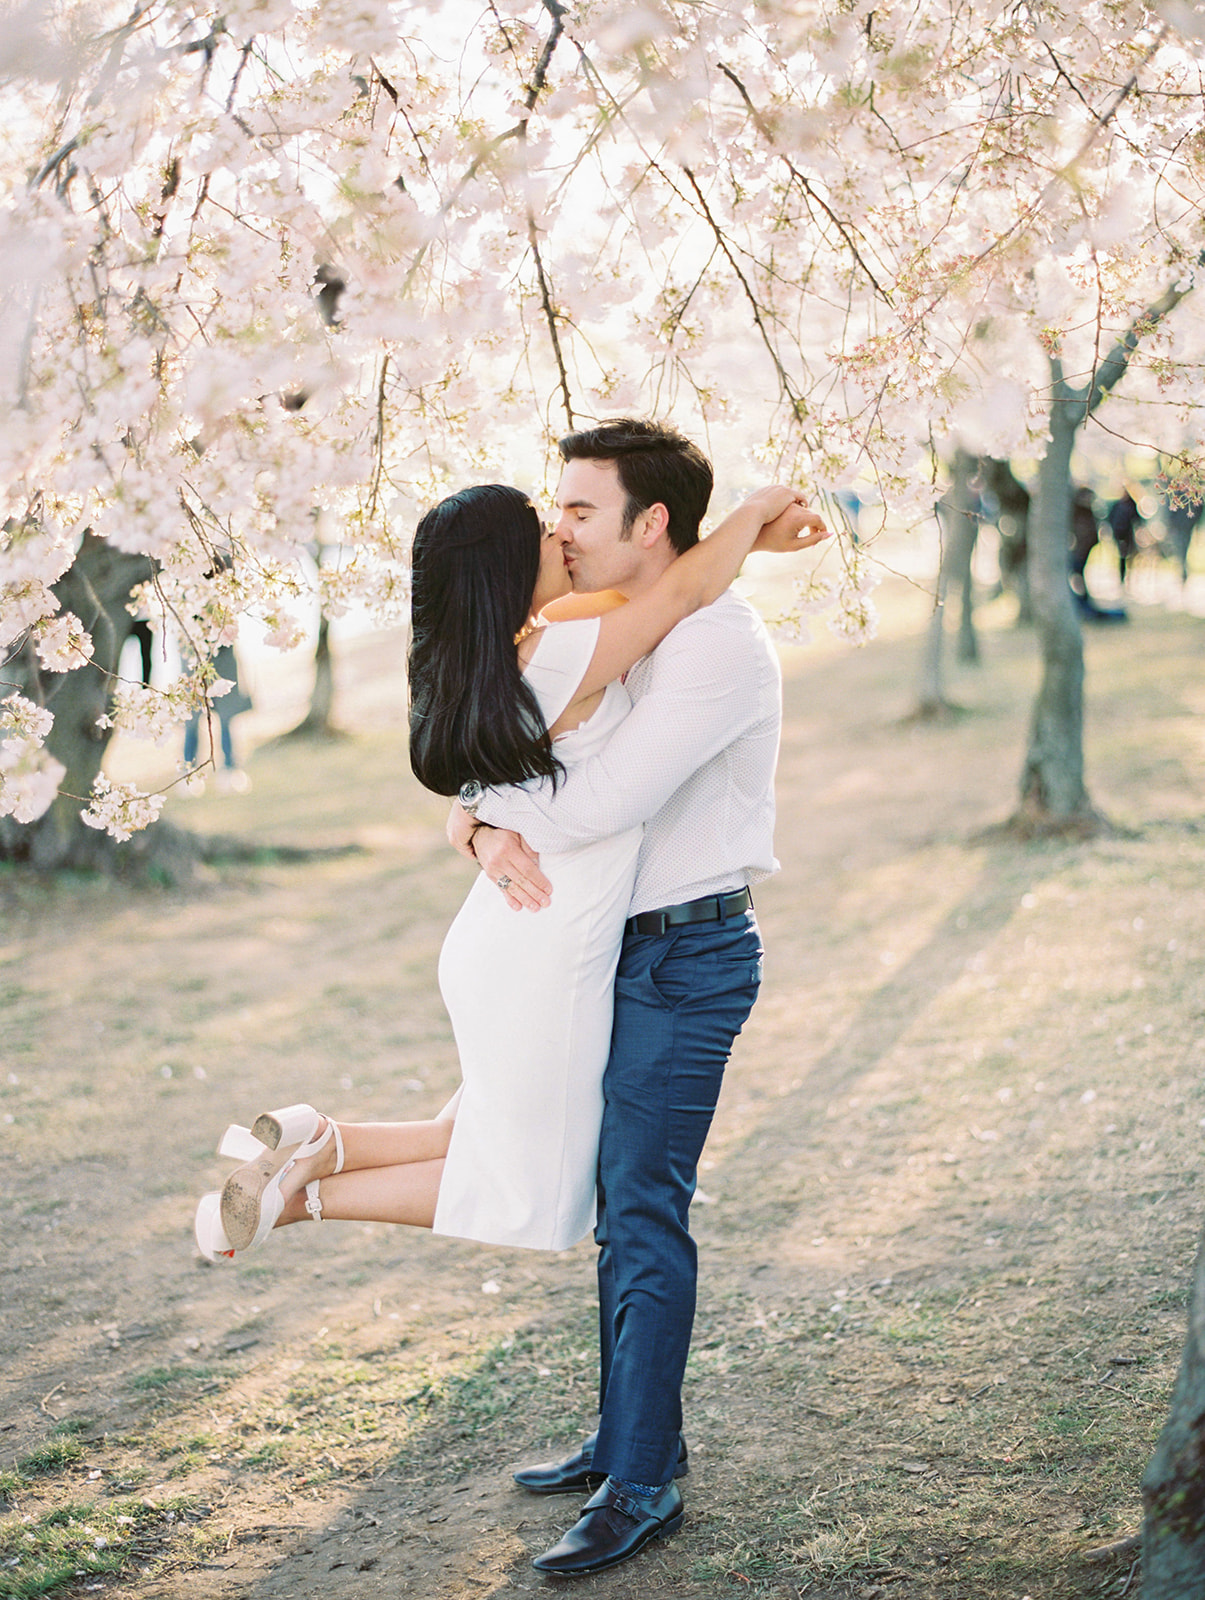 An engaged couple holding each other and kissing, surrounded by cherry blossom trees.